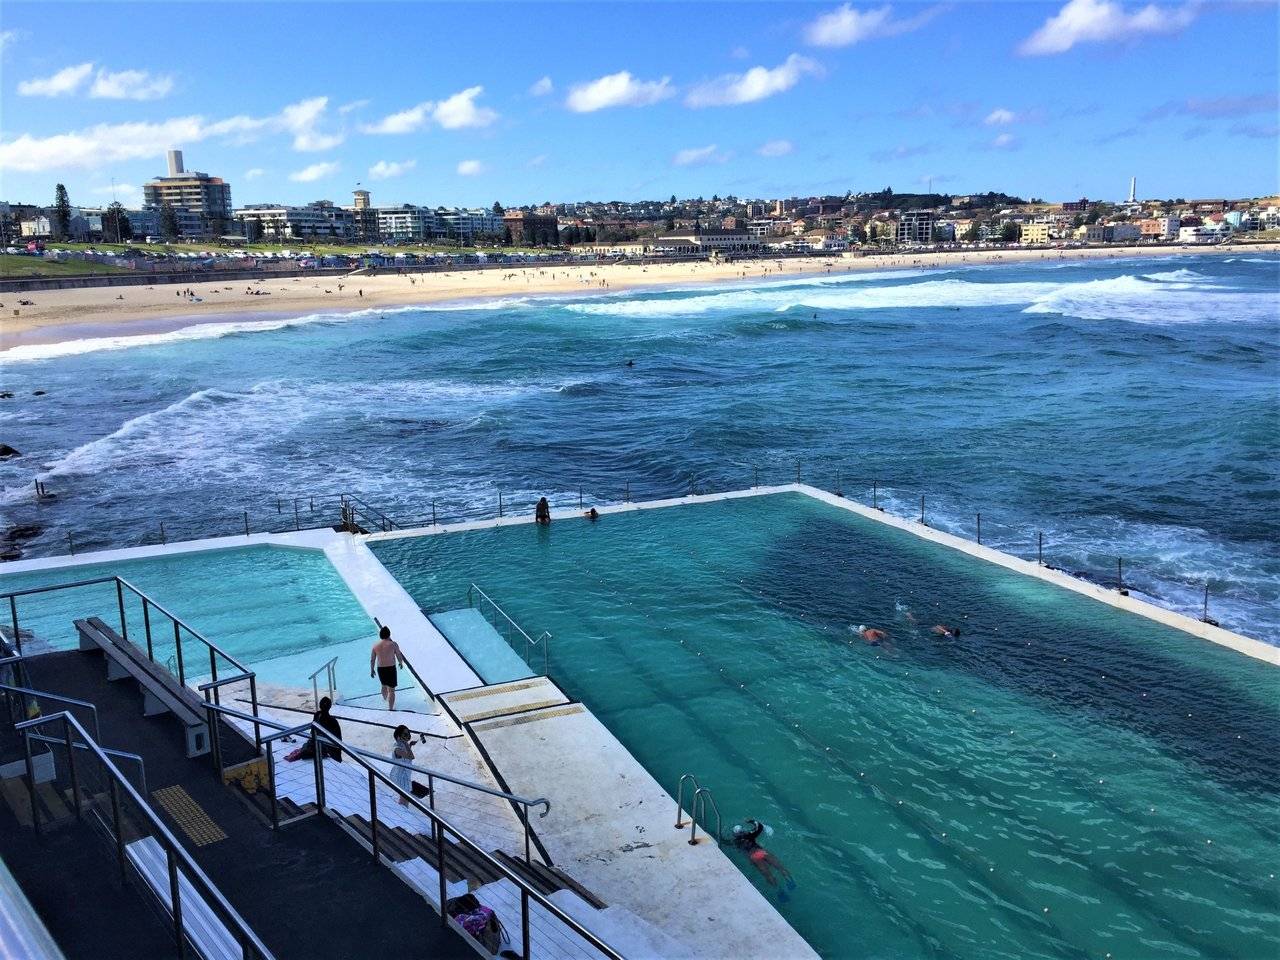 If you go swimming, you have a great view from the pool on the Bondi Beach - one of the most popular beaches in Australia.